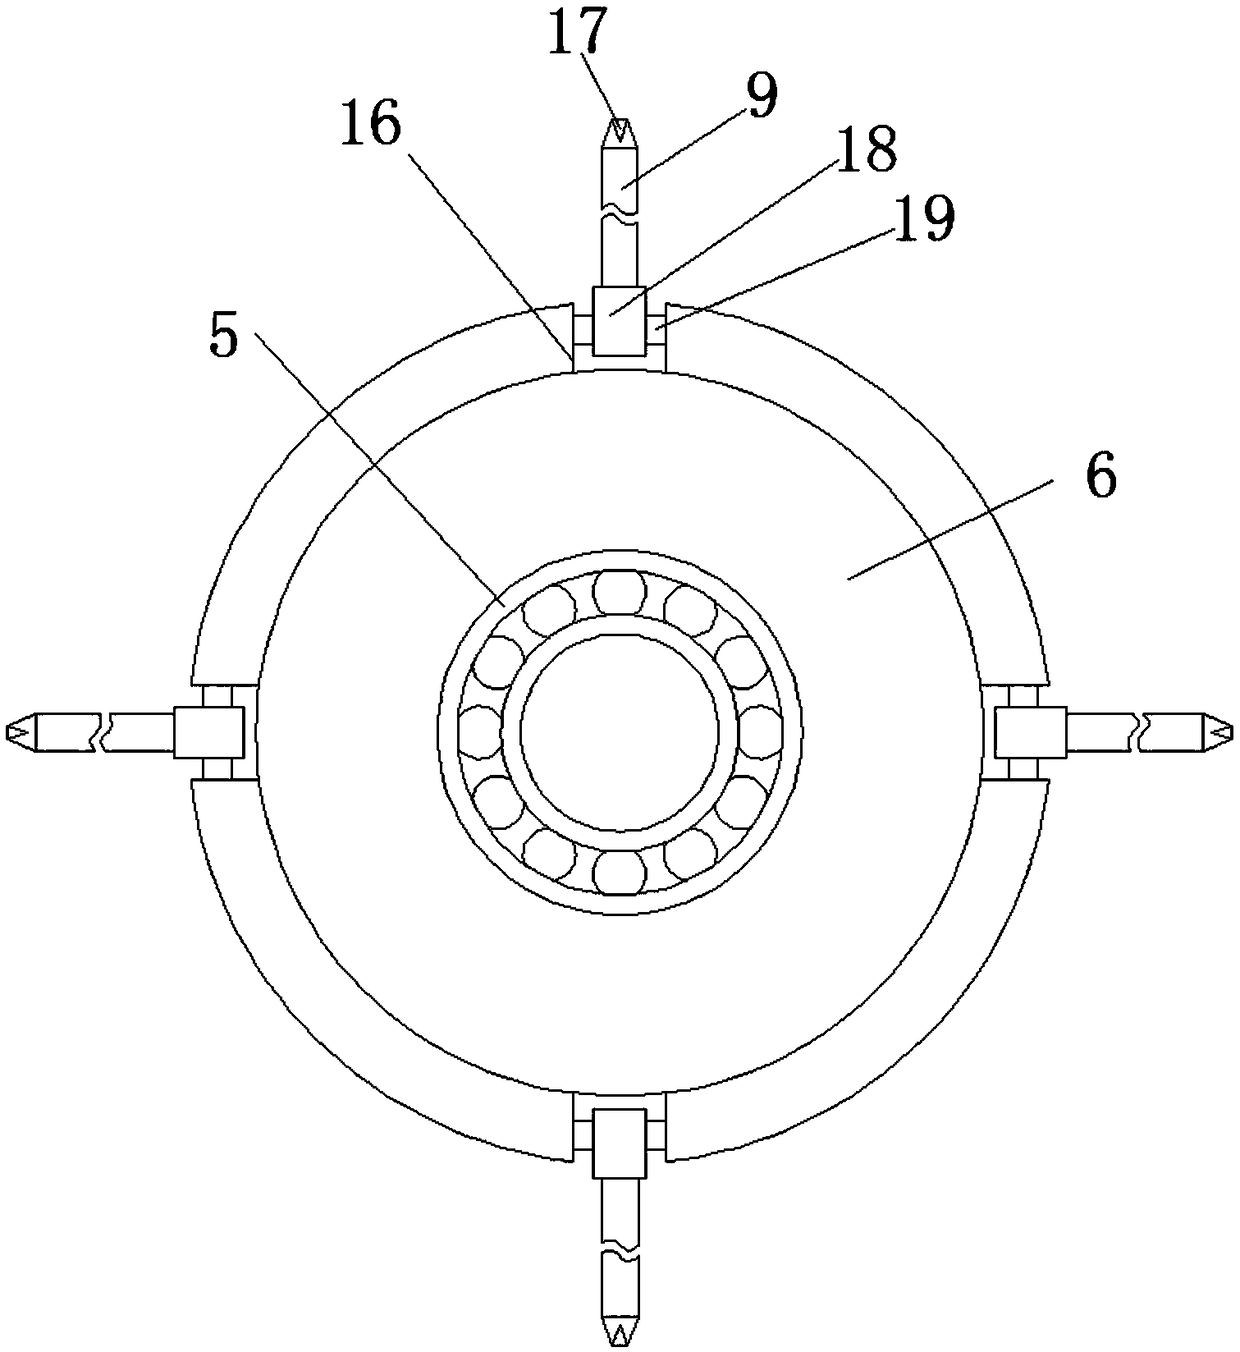 Polishing device with double polishing wheels capable of being easily disassembled and assembled